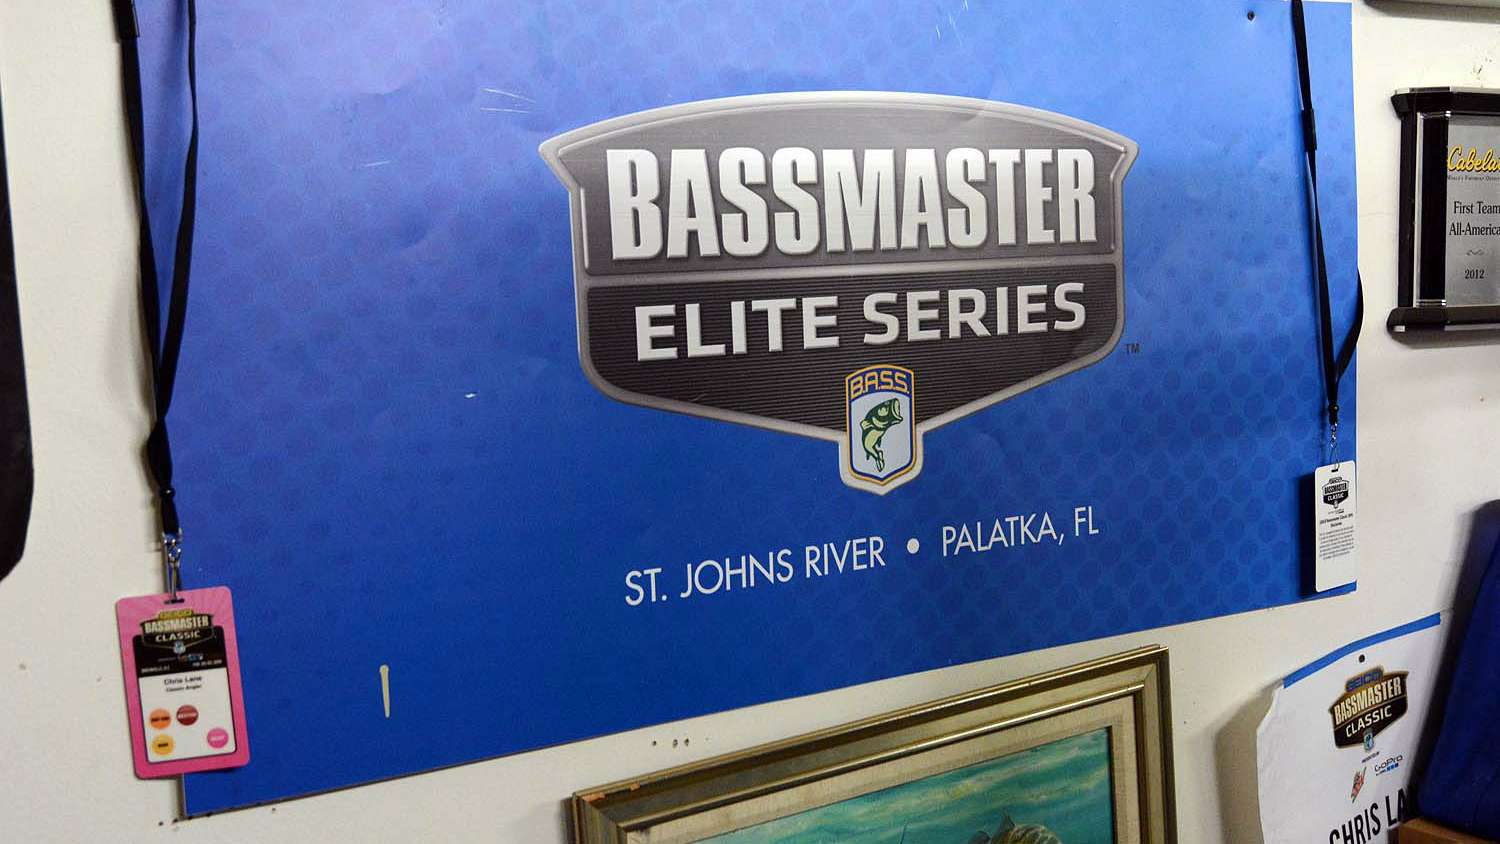 This treasured banner is from the Elite Series held in Palataka., Fla., where Lane won the 2014 event on the St. Johns River. 